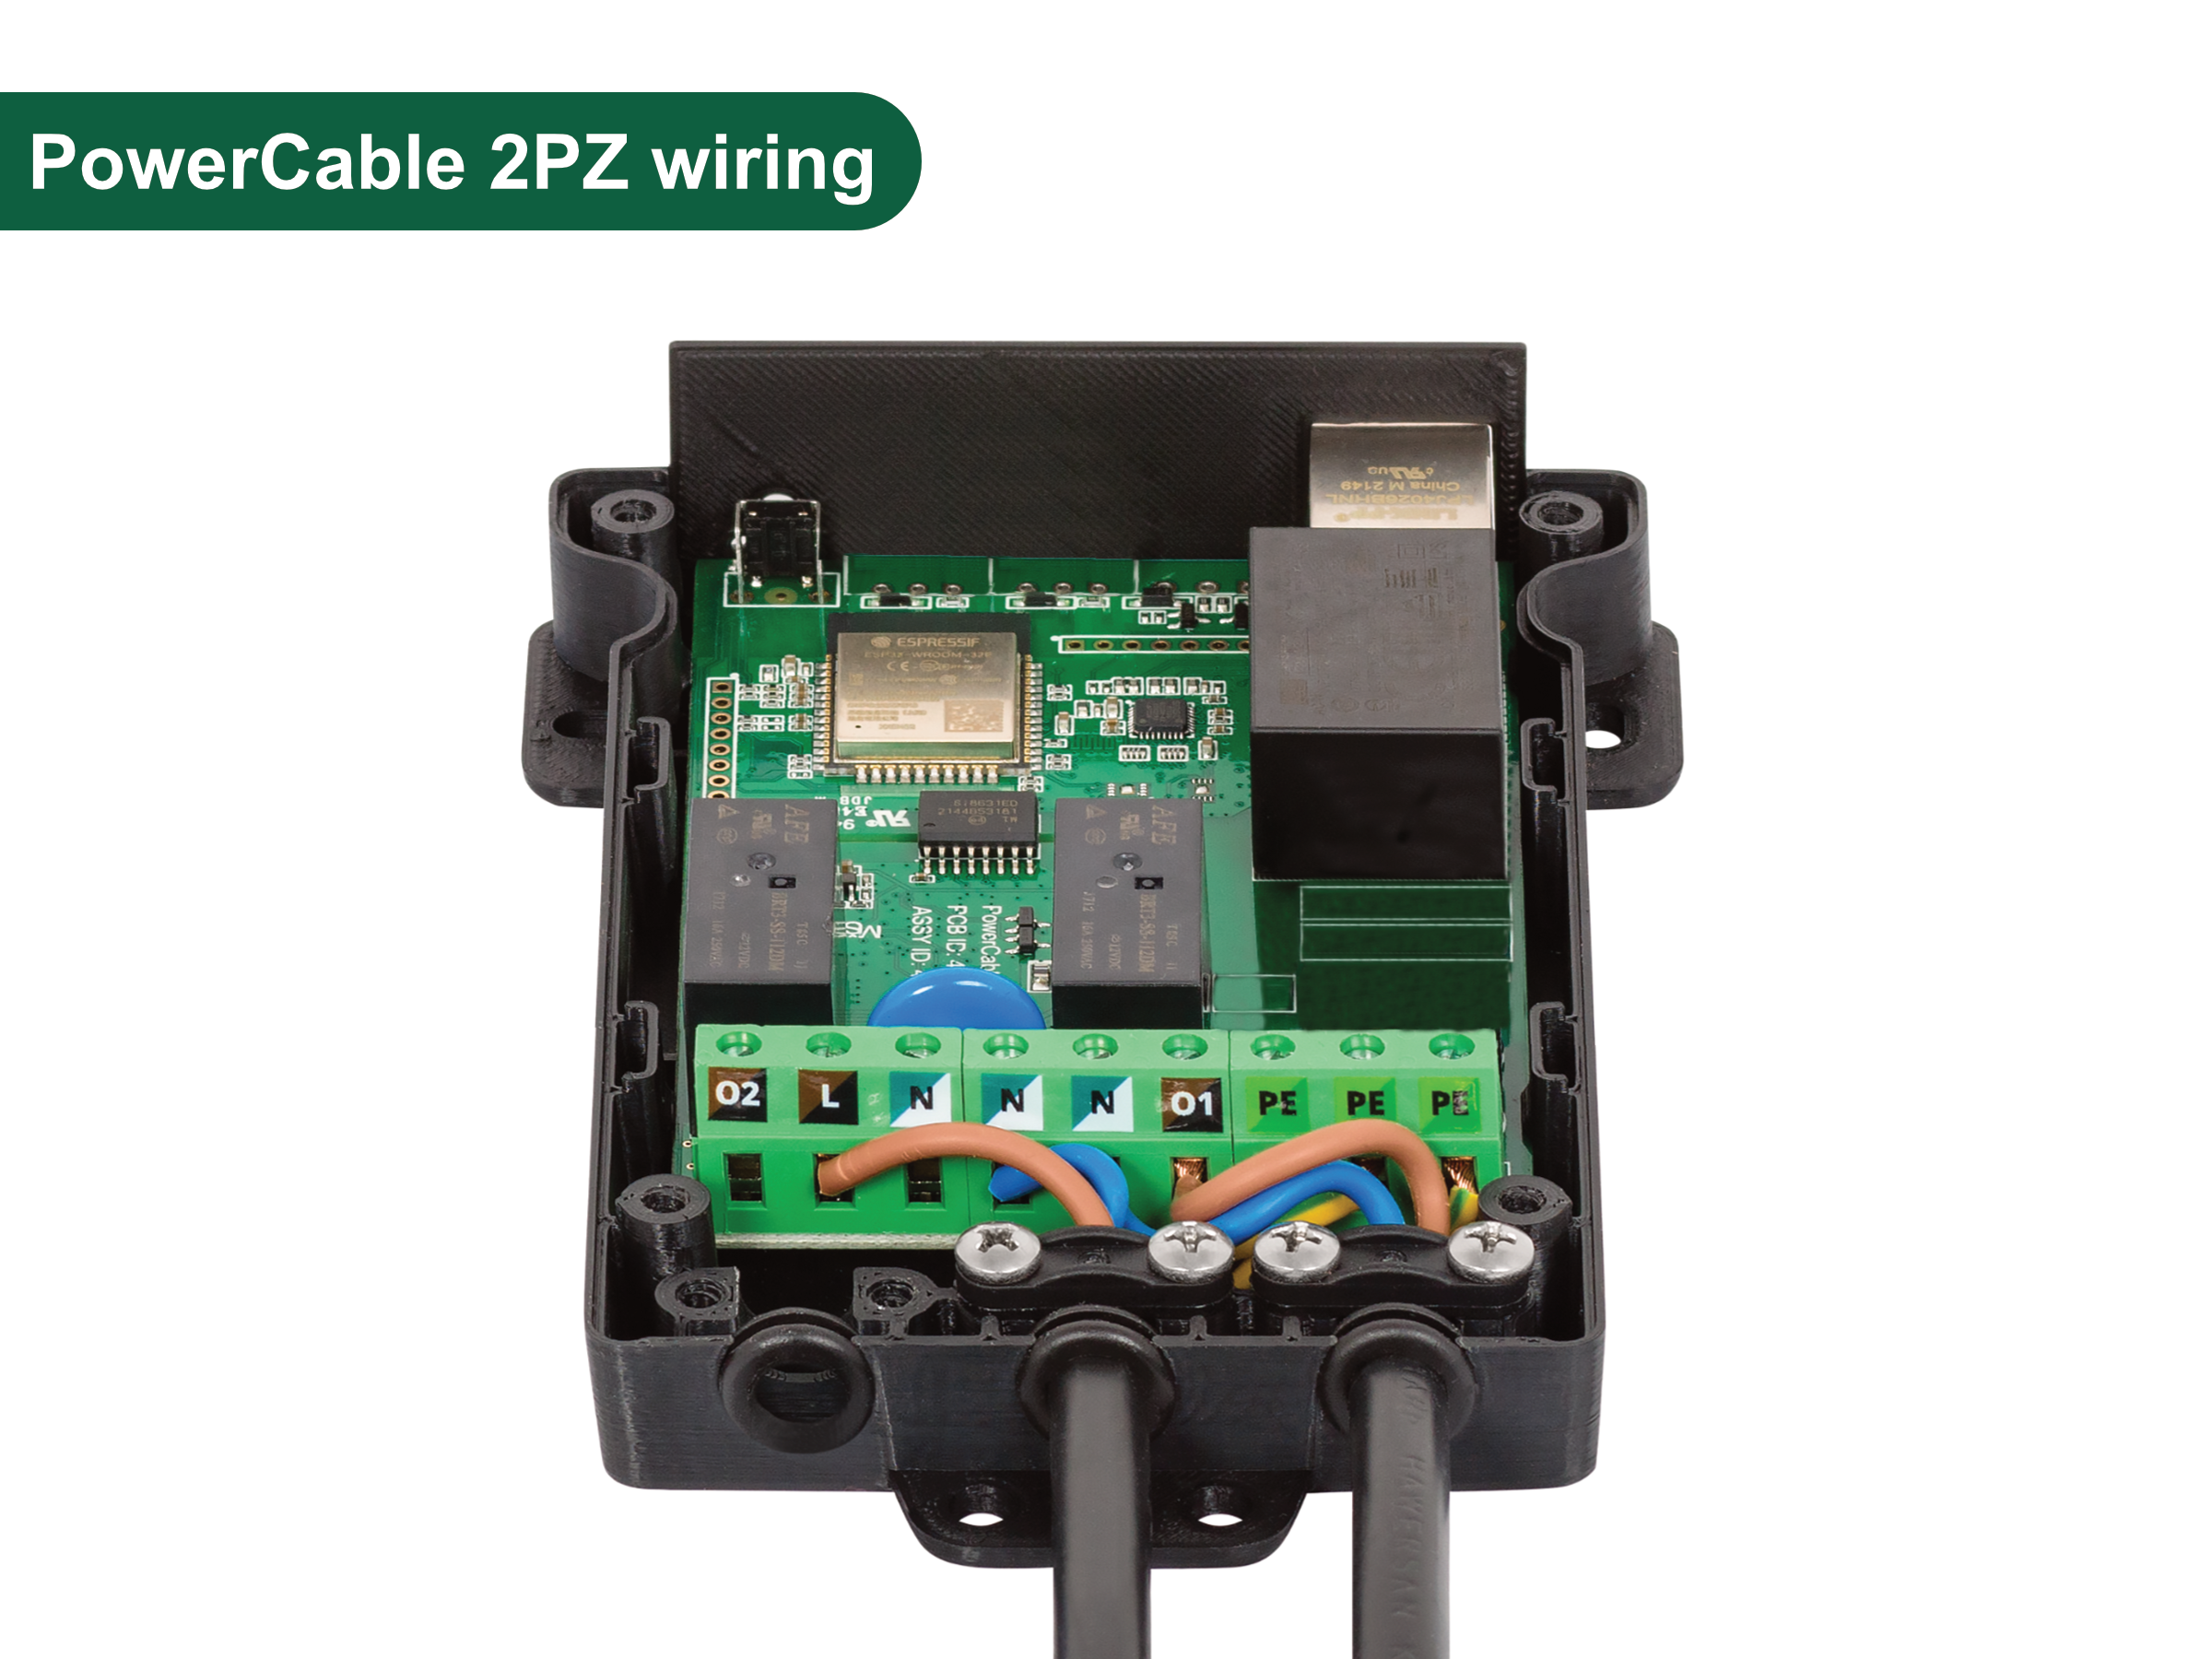 PowerCable 2KZ is a smart 2x 230V/16A device with LAN &amp; WiFi connectivity. Each output can be switched and metered individually. Web interface, NETIO Cloud, M2M protocols: XML http, JSON http and URL API. ZCS (Zero Current Switching), 2 x DI. No power cable included (mounted on request, F/E/S/G type ask for price)